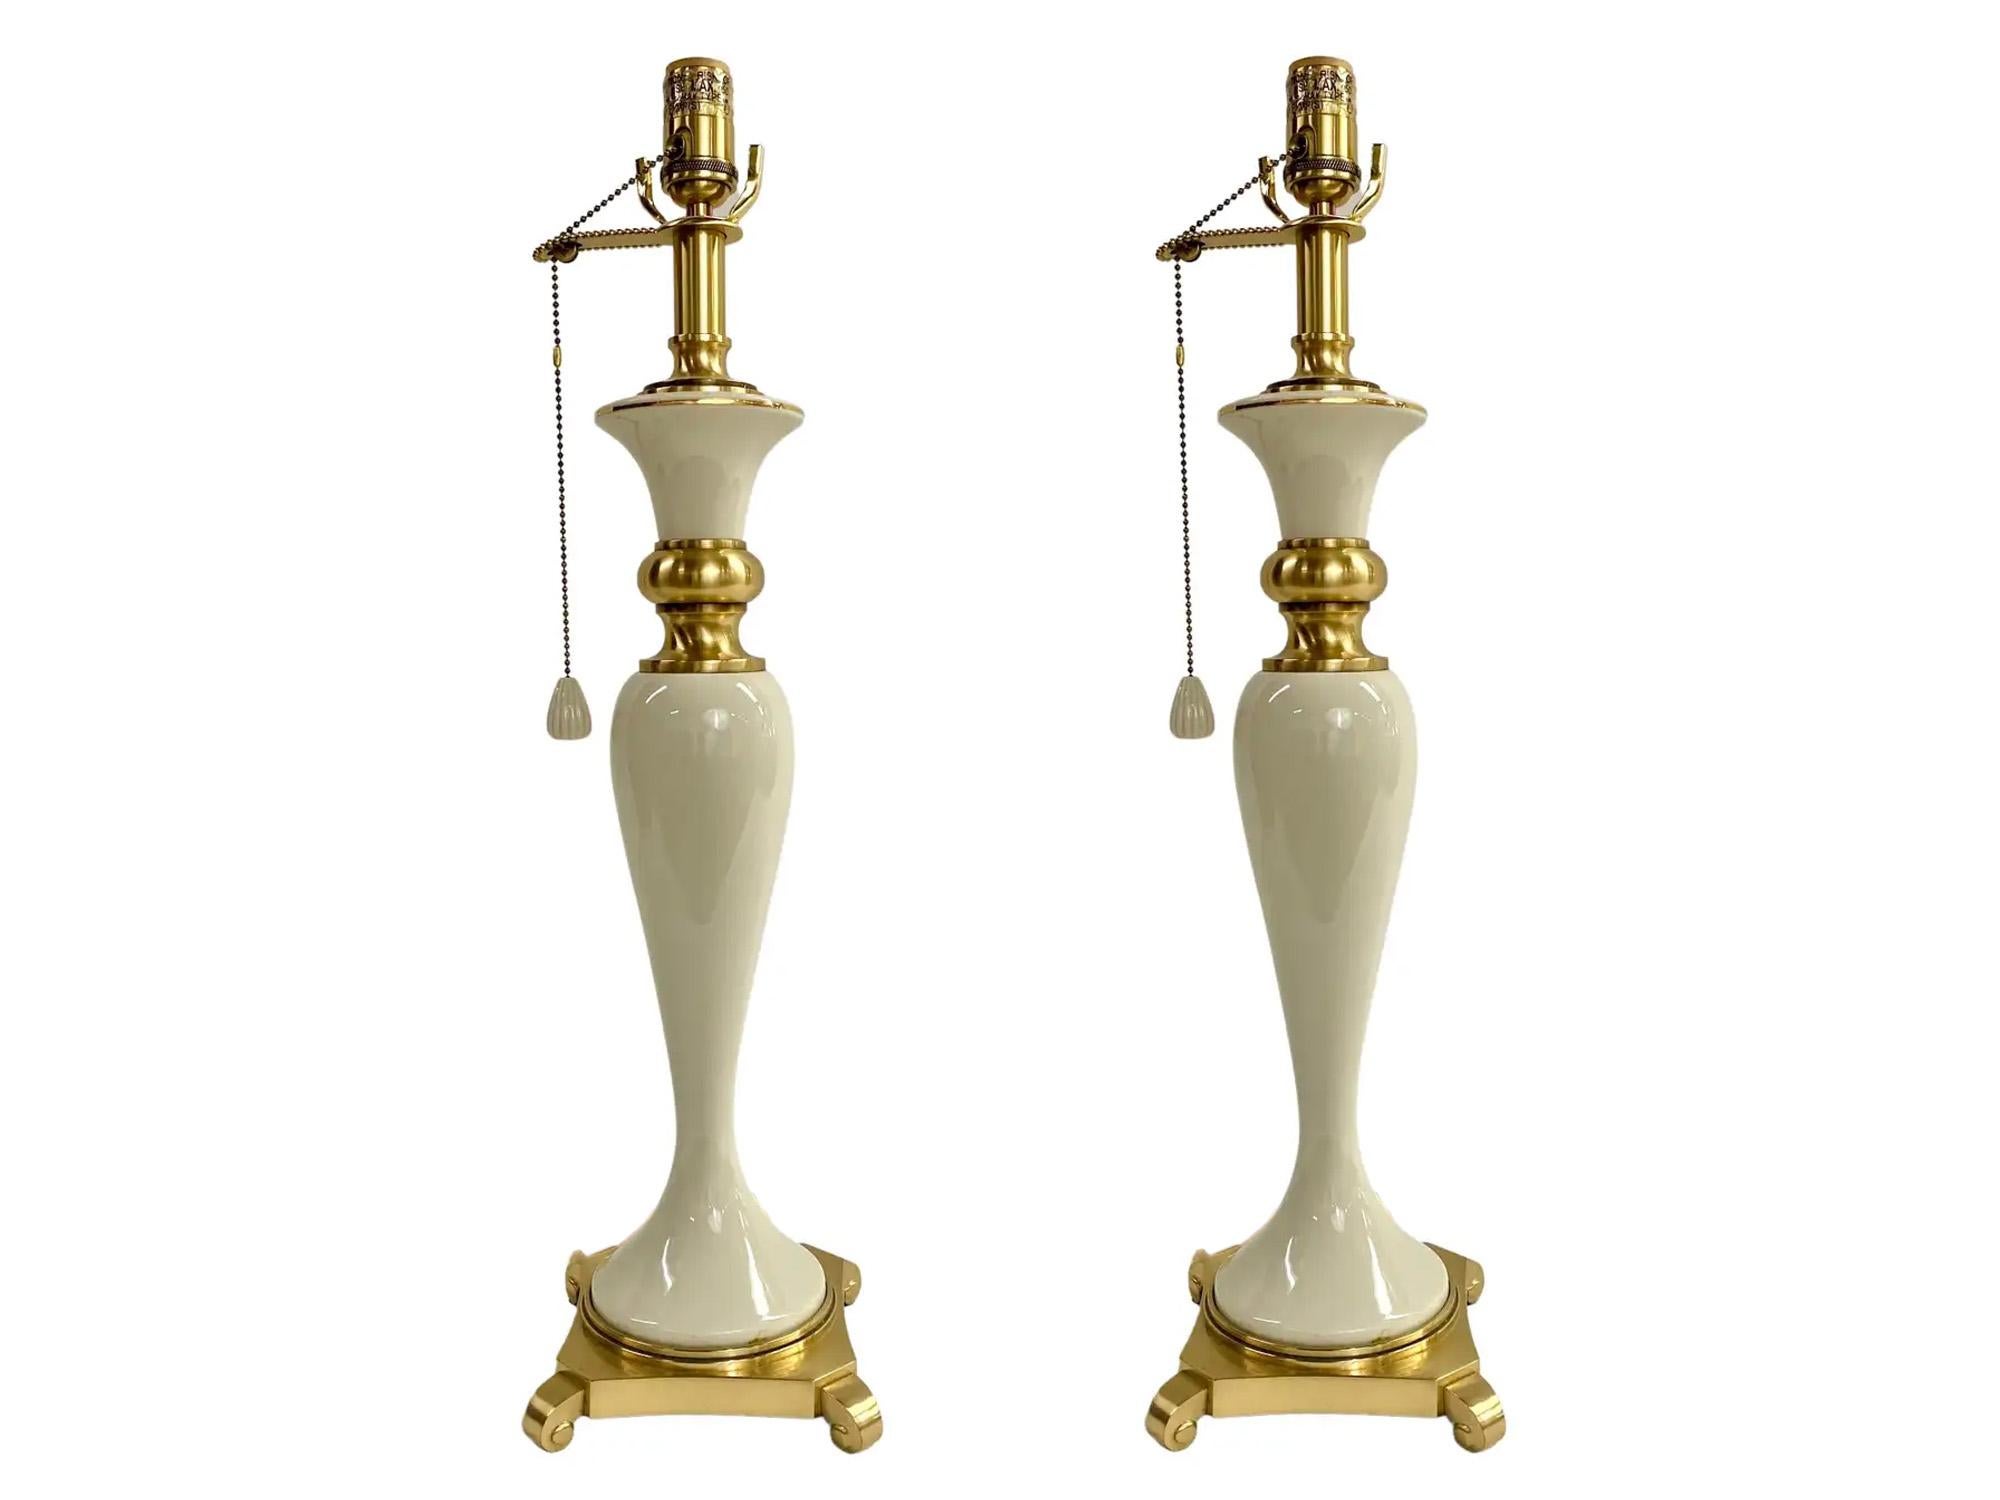 A pair of Hollywood Regency style table lamps by Lenox for Quoizel. The classic style lamps are made of white porcelain and feature beautiful brass trim and base. The lamps are both marked by the base and read